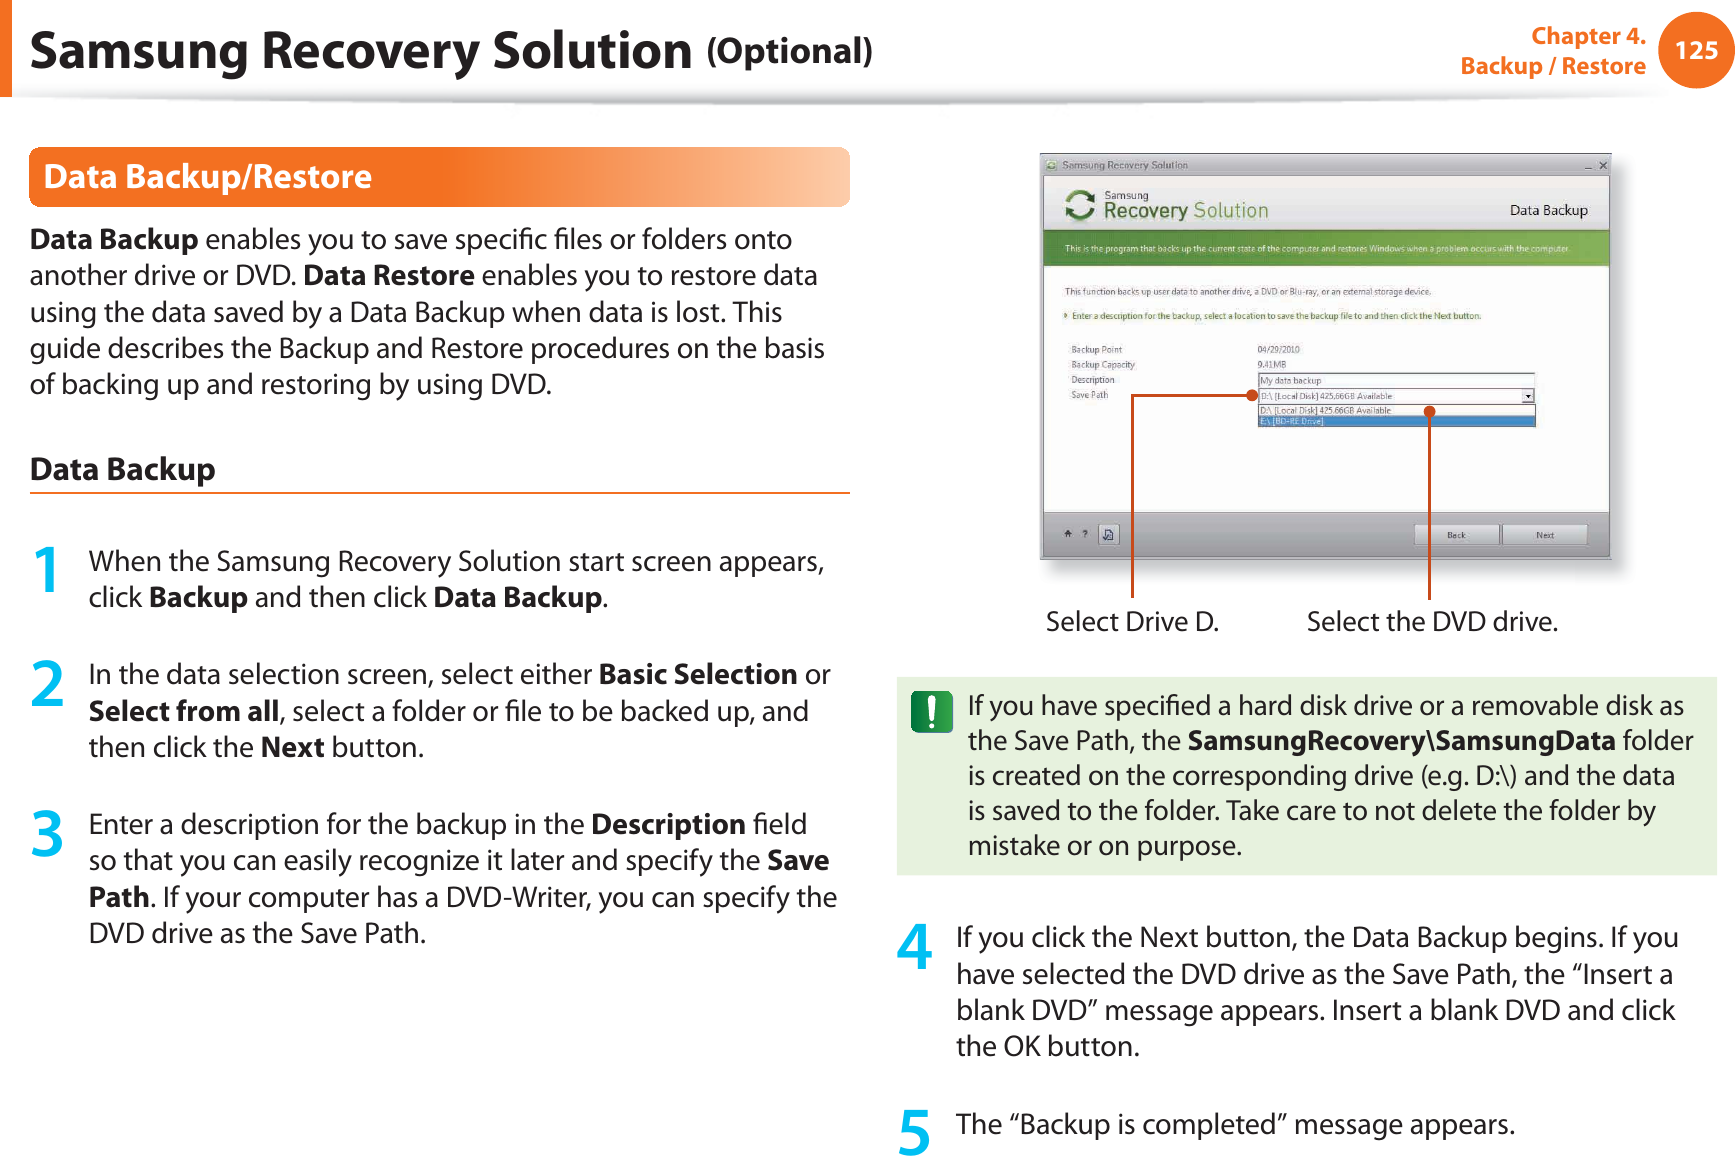 125Chapter 4.  Backup / RestoreData Backup/RestoreData Backup enables you to save speciﬁ c ﬁ les or folders onto another drive or DVD. Data Restore enables you to restore data using the data saved by a Data Backup when data is lost. This guide describes the Backup and Restore procedures on the basis of backing up and restoring by using DVD.Data Backup1  When the Samsung Recovery Solution start screen appears, click Backup and then click Data Backup.2  In the data selection screen, select either Basic Selection or Select from all, select a folder or ﬁ le to be backed up, and then click the Next button.3  Enter a description for the backup in the Description ﬁ eld so that you can easily recognize it later and specify the Save Path. If your computer has a DVD-Writer, you can specify the DVD drive as the Save Path.Select Drive D. Select the DVD drive.If you have speciﬁ ed a hard disk drive or a removable disk as the Save Path, the SamsungRecovery\SamsungData folder is created on the corresponding drive (e.g. D:\) and the data is saved to the folder. Take care to not delete the folder by mistake or on purpose.4  If you click the Next button, the Data Backup begins. If you have selected the DVD drive as the Save Path, the “Insert a blank DVD” message appears. Insert a blank DVD and click the OK button.5  The “Backup is completed” message appears.Samsung Recovery Solution (Optional)